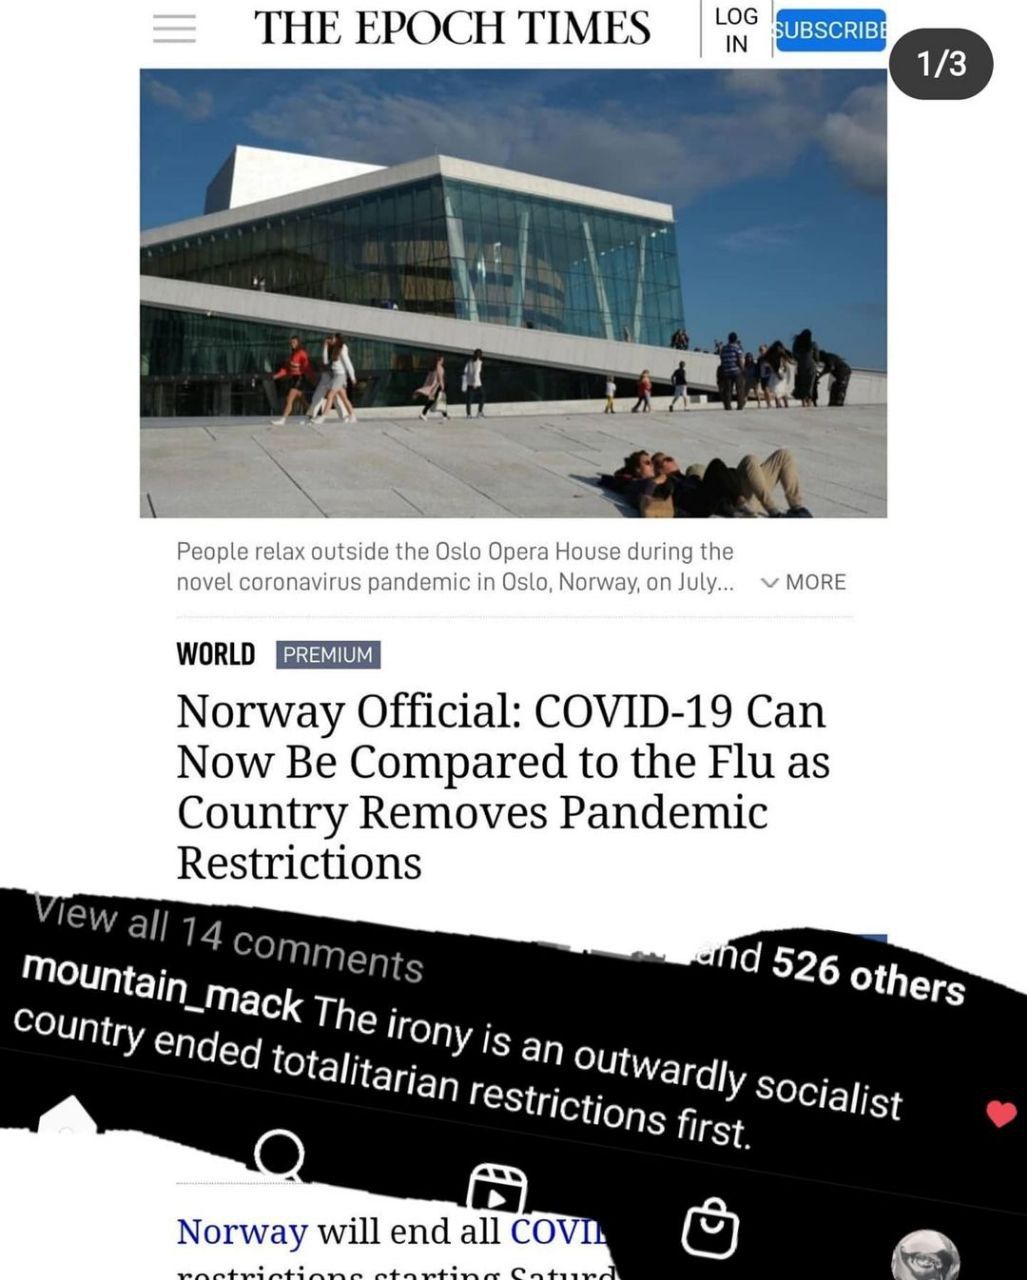 Socialist country stopped being retarded